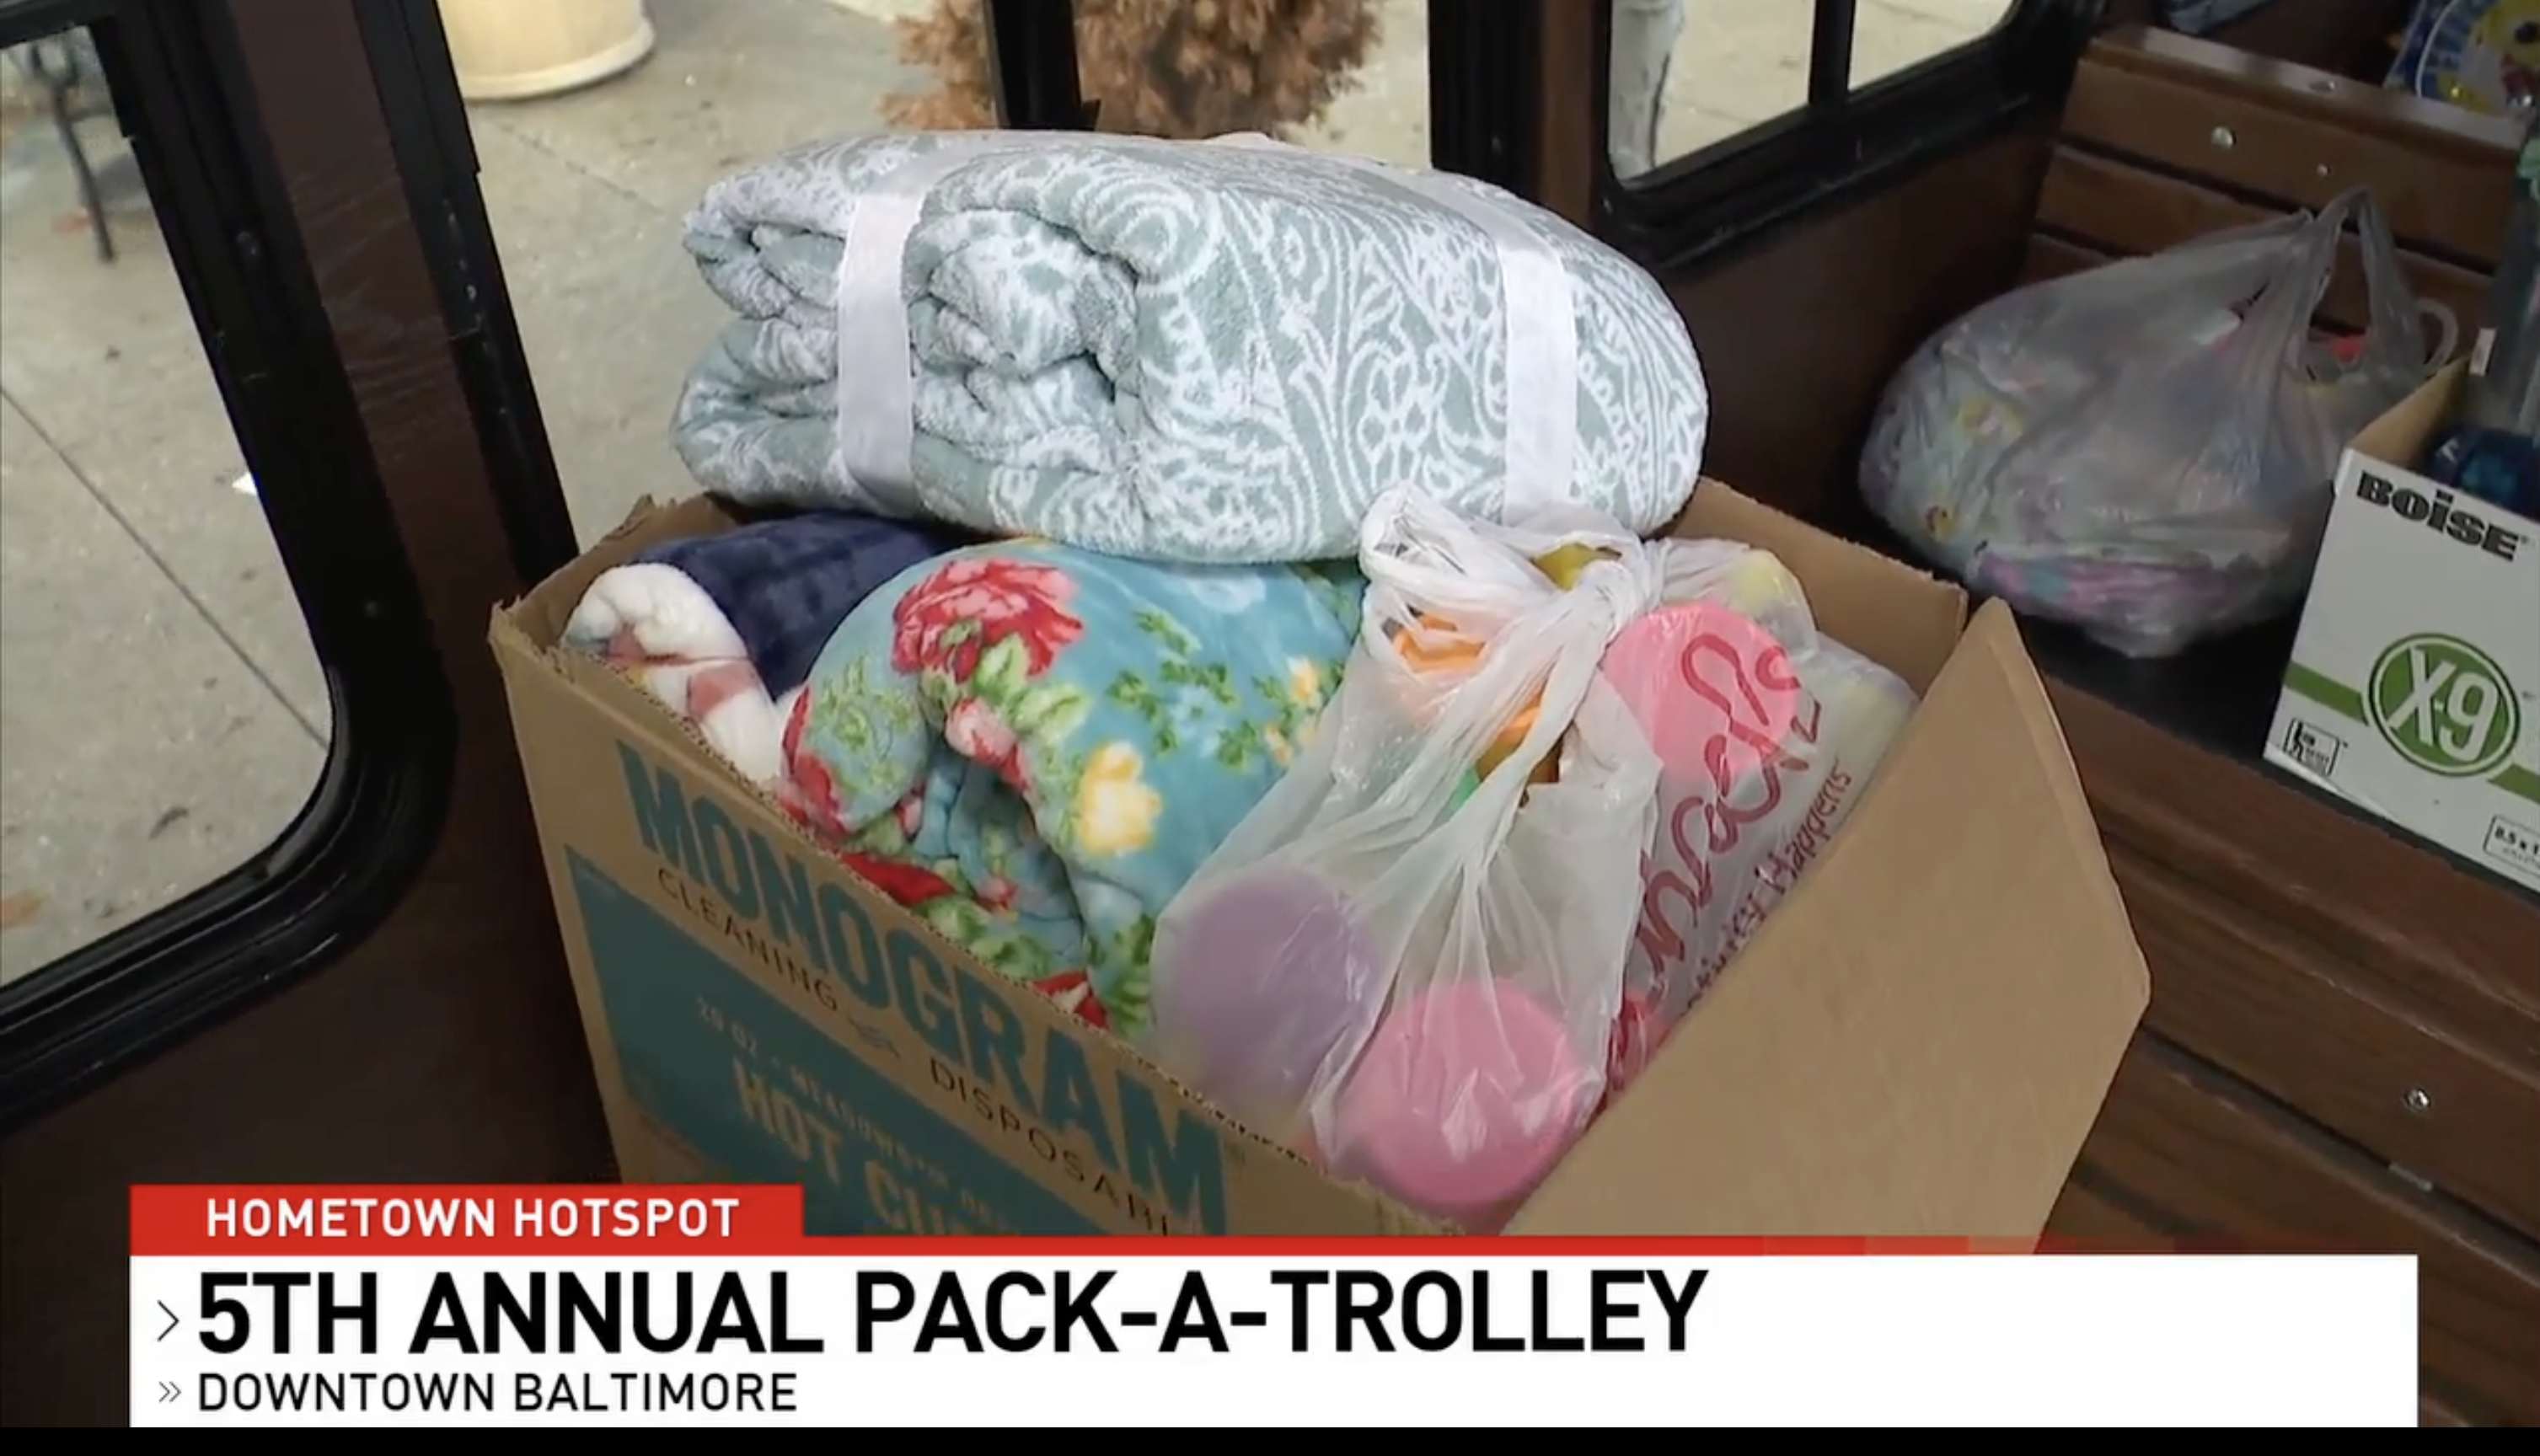 5th Annual Pack-a-Trolley event benefiting children in foster care